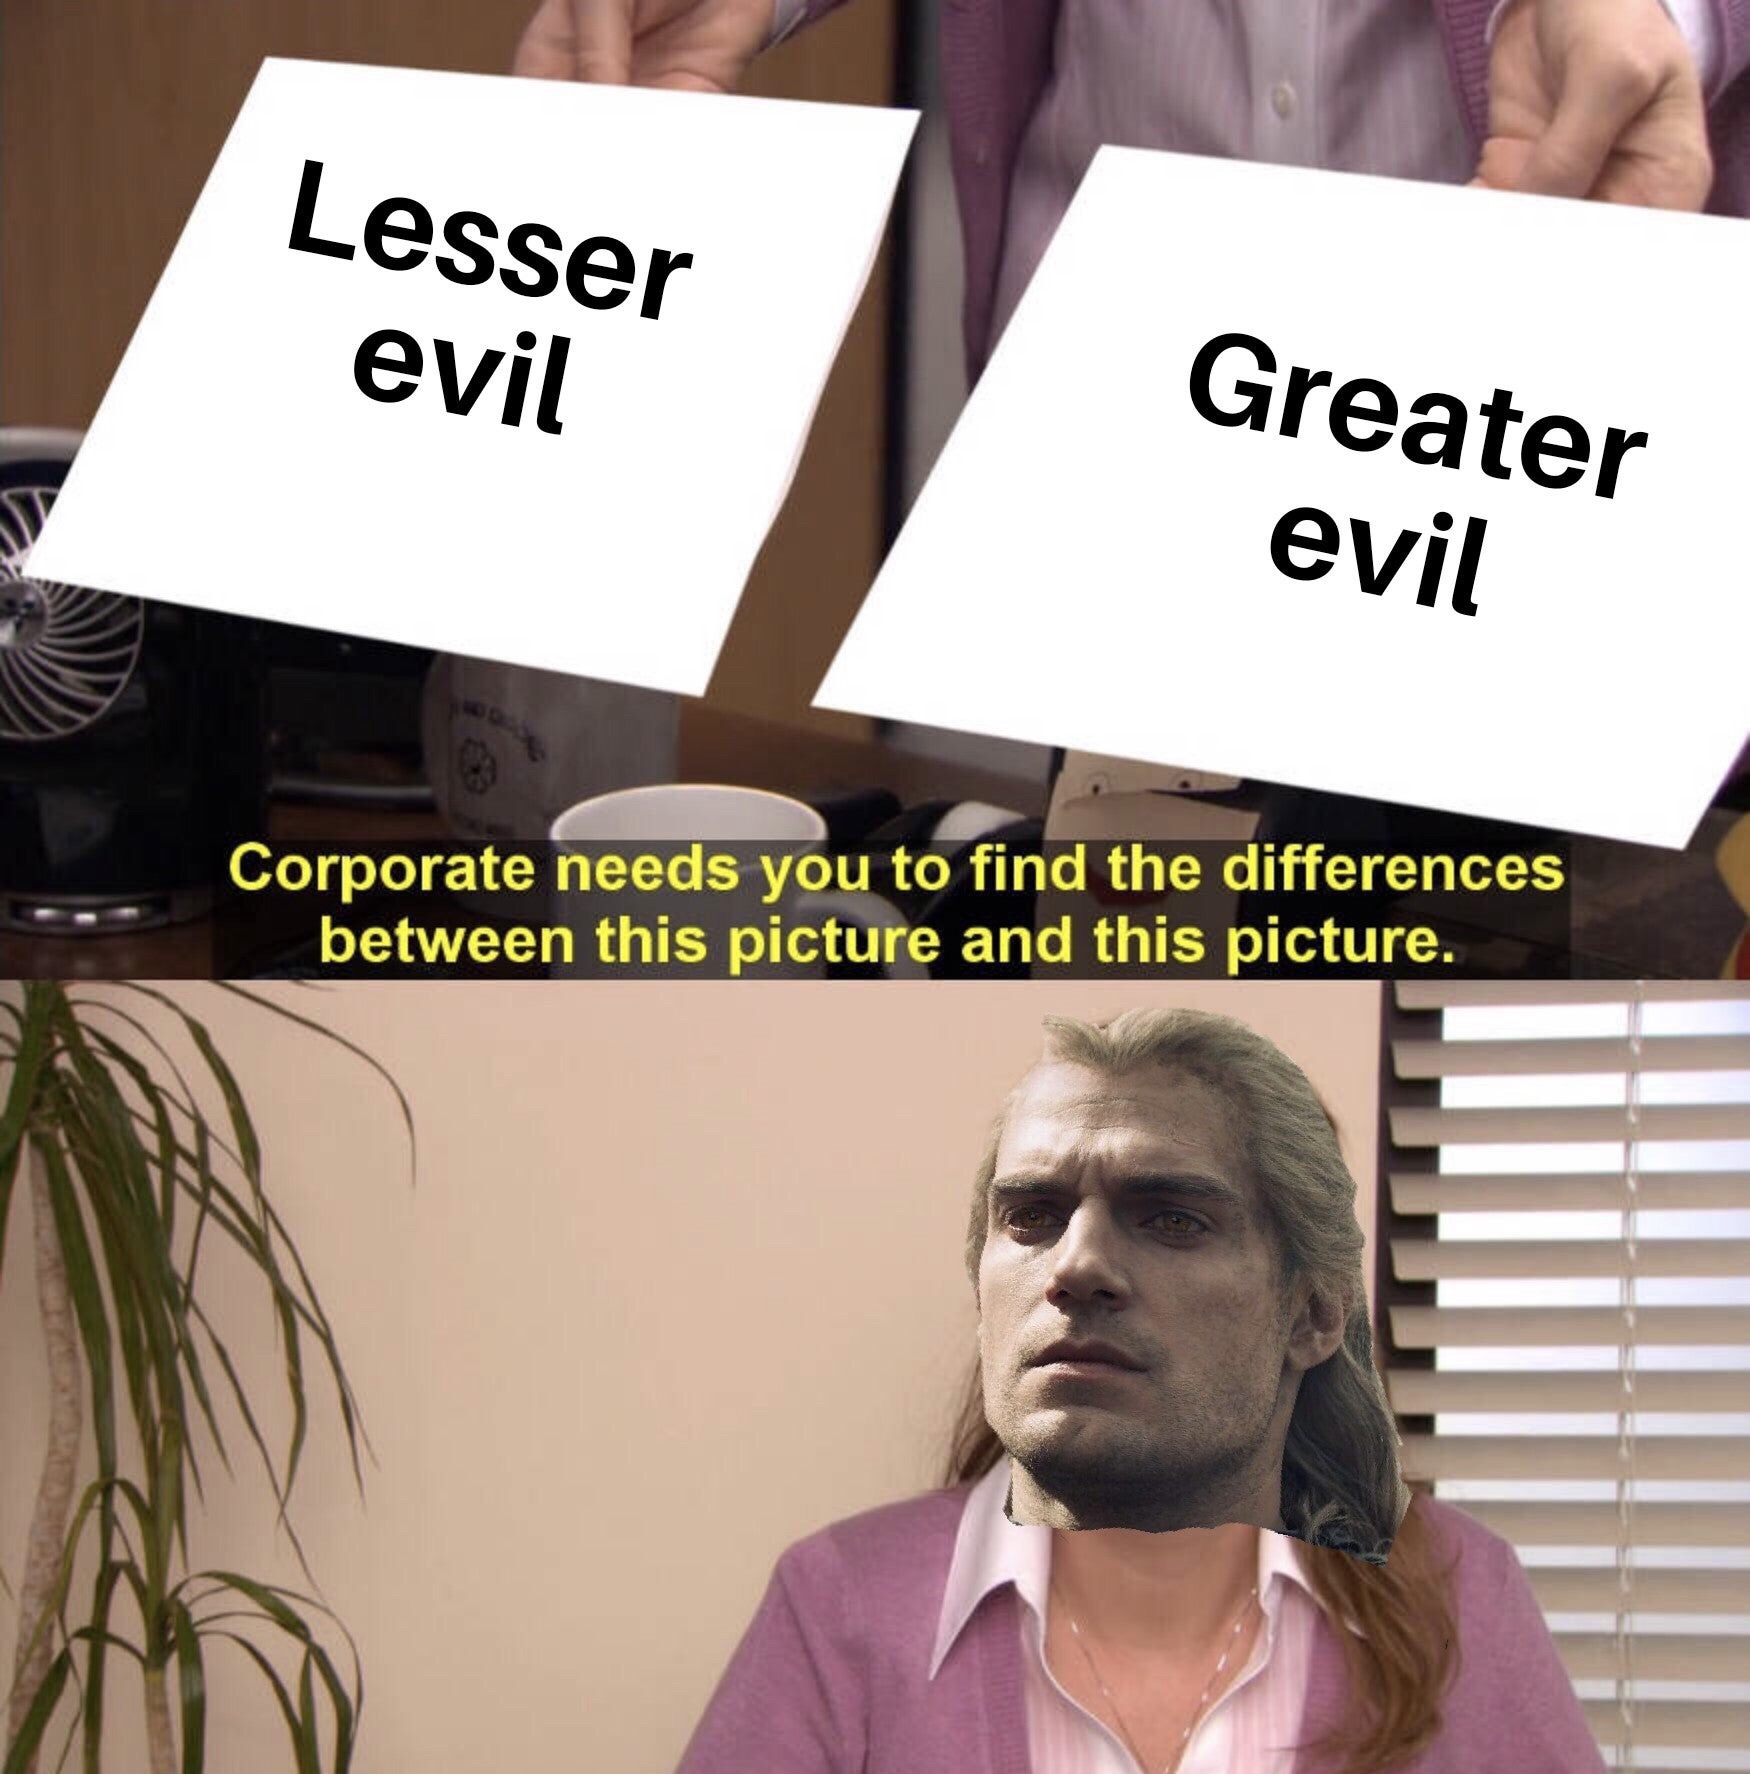 corporate needs you to find the difference - Lesser evil Greater evil Corporate needs you to find the differences between this picture and this picture.